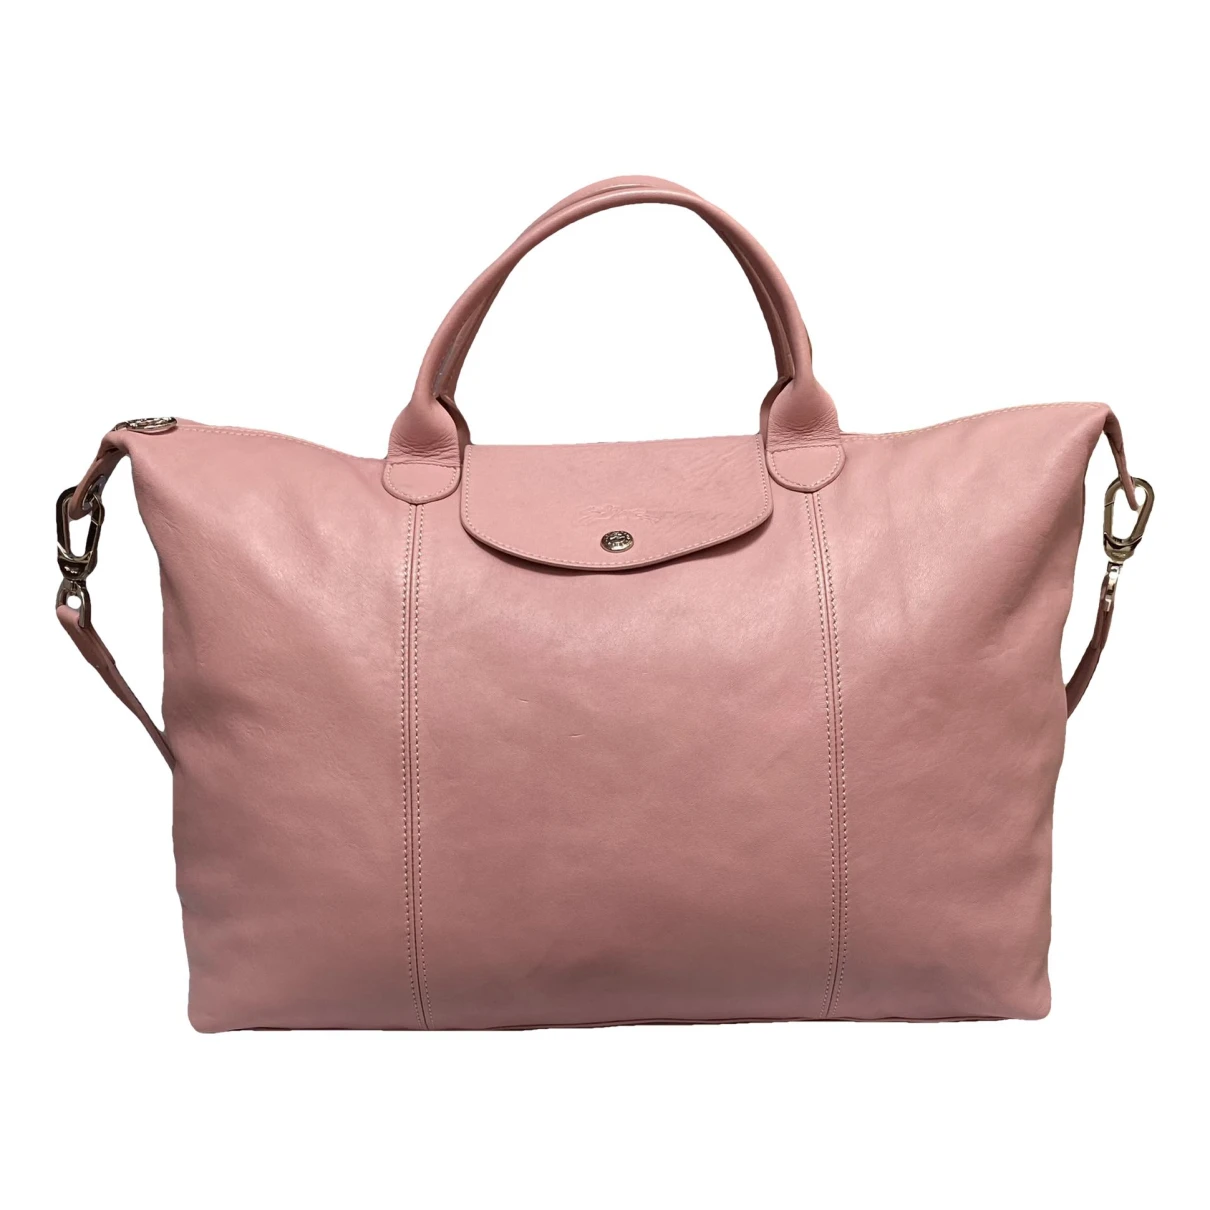 Pre-owned Longchamp Pliage Leather Handbag In Pink